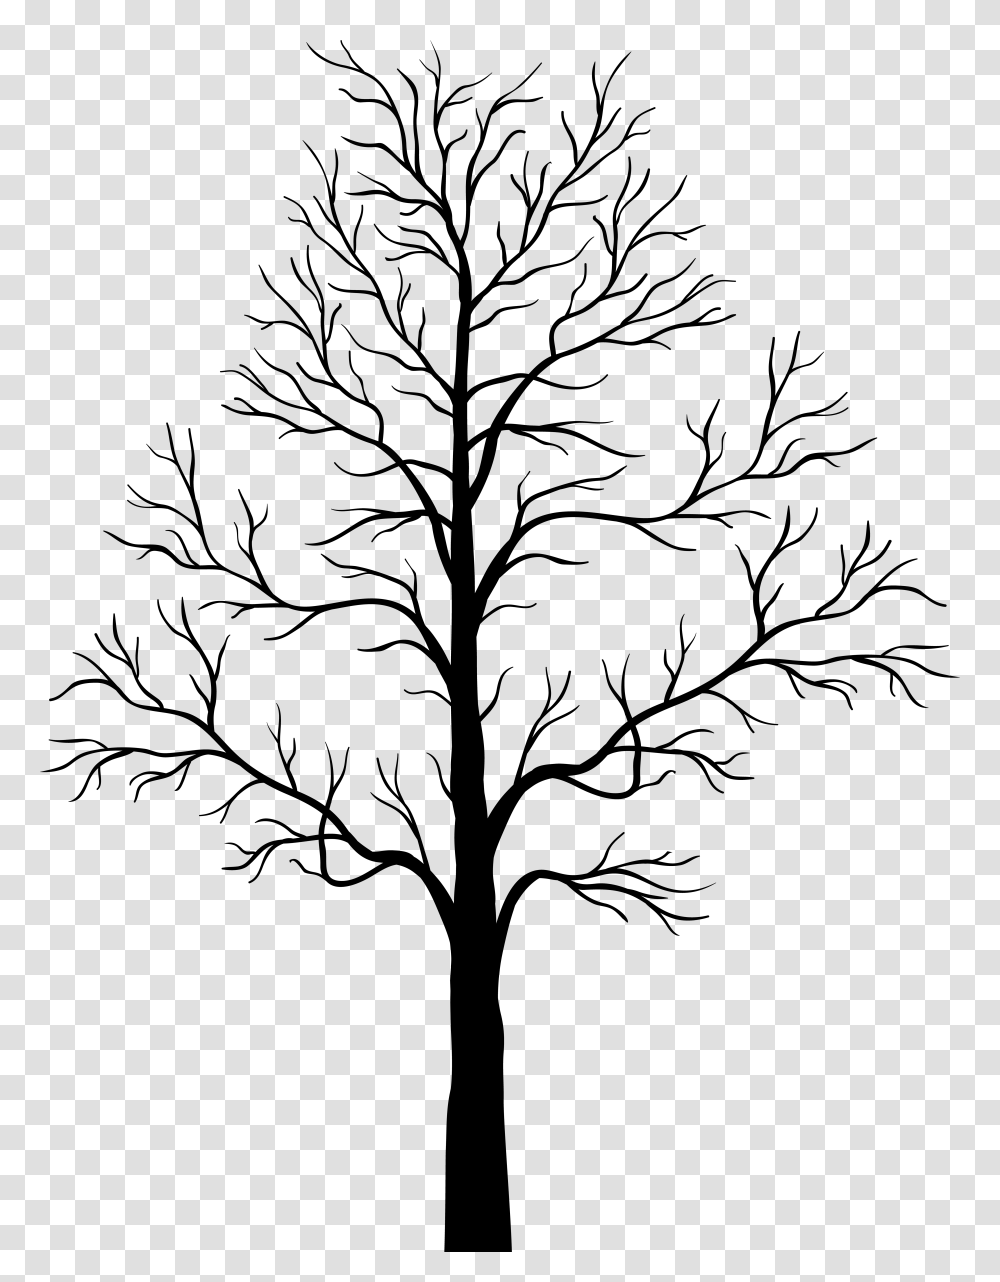 Dead Tree Silhouette Clip, Cross, Sign Transparent Png